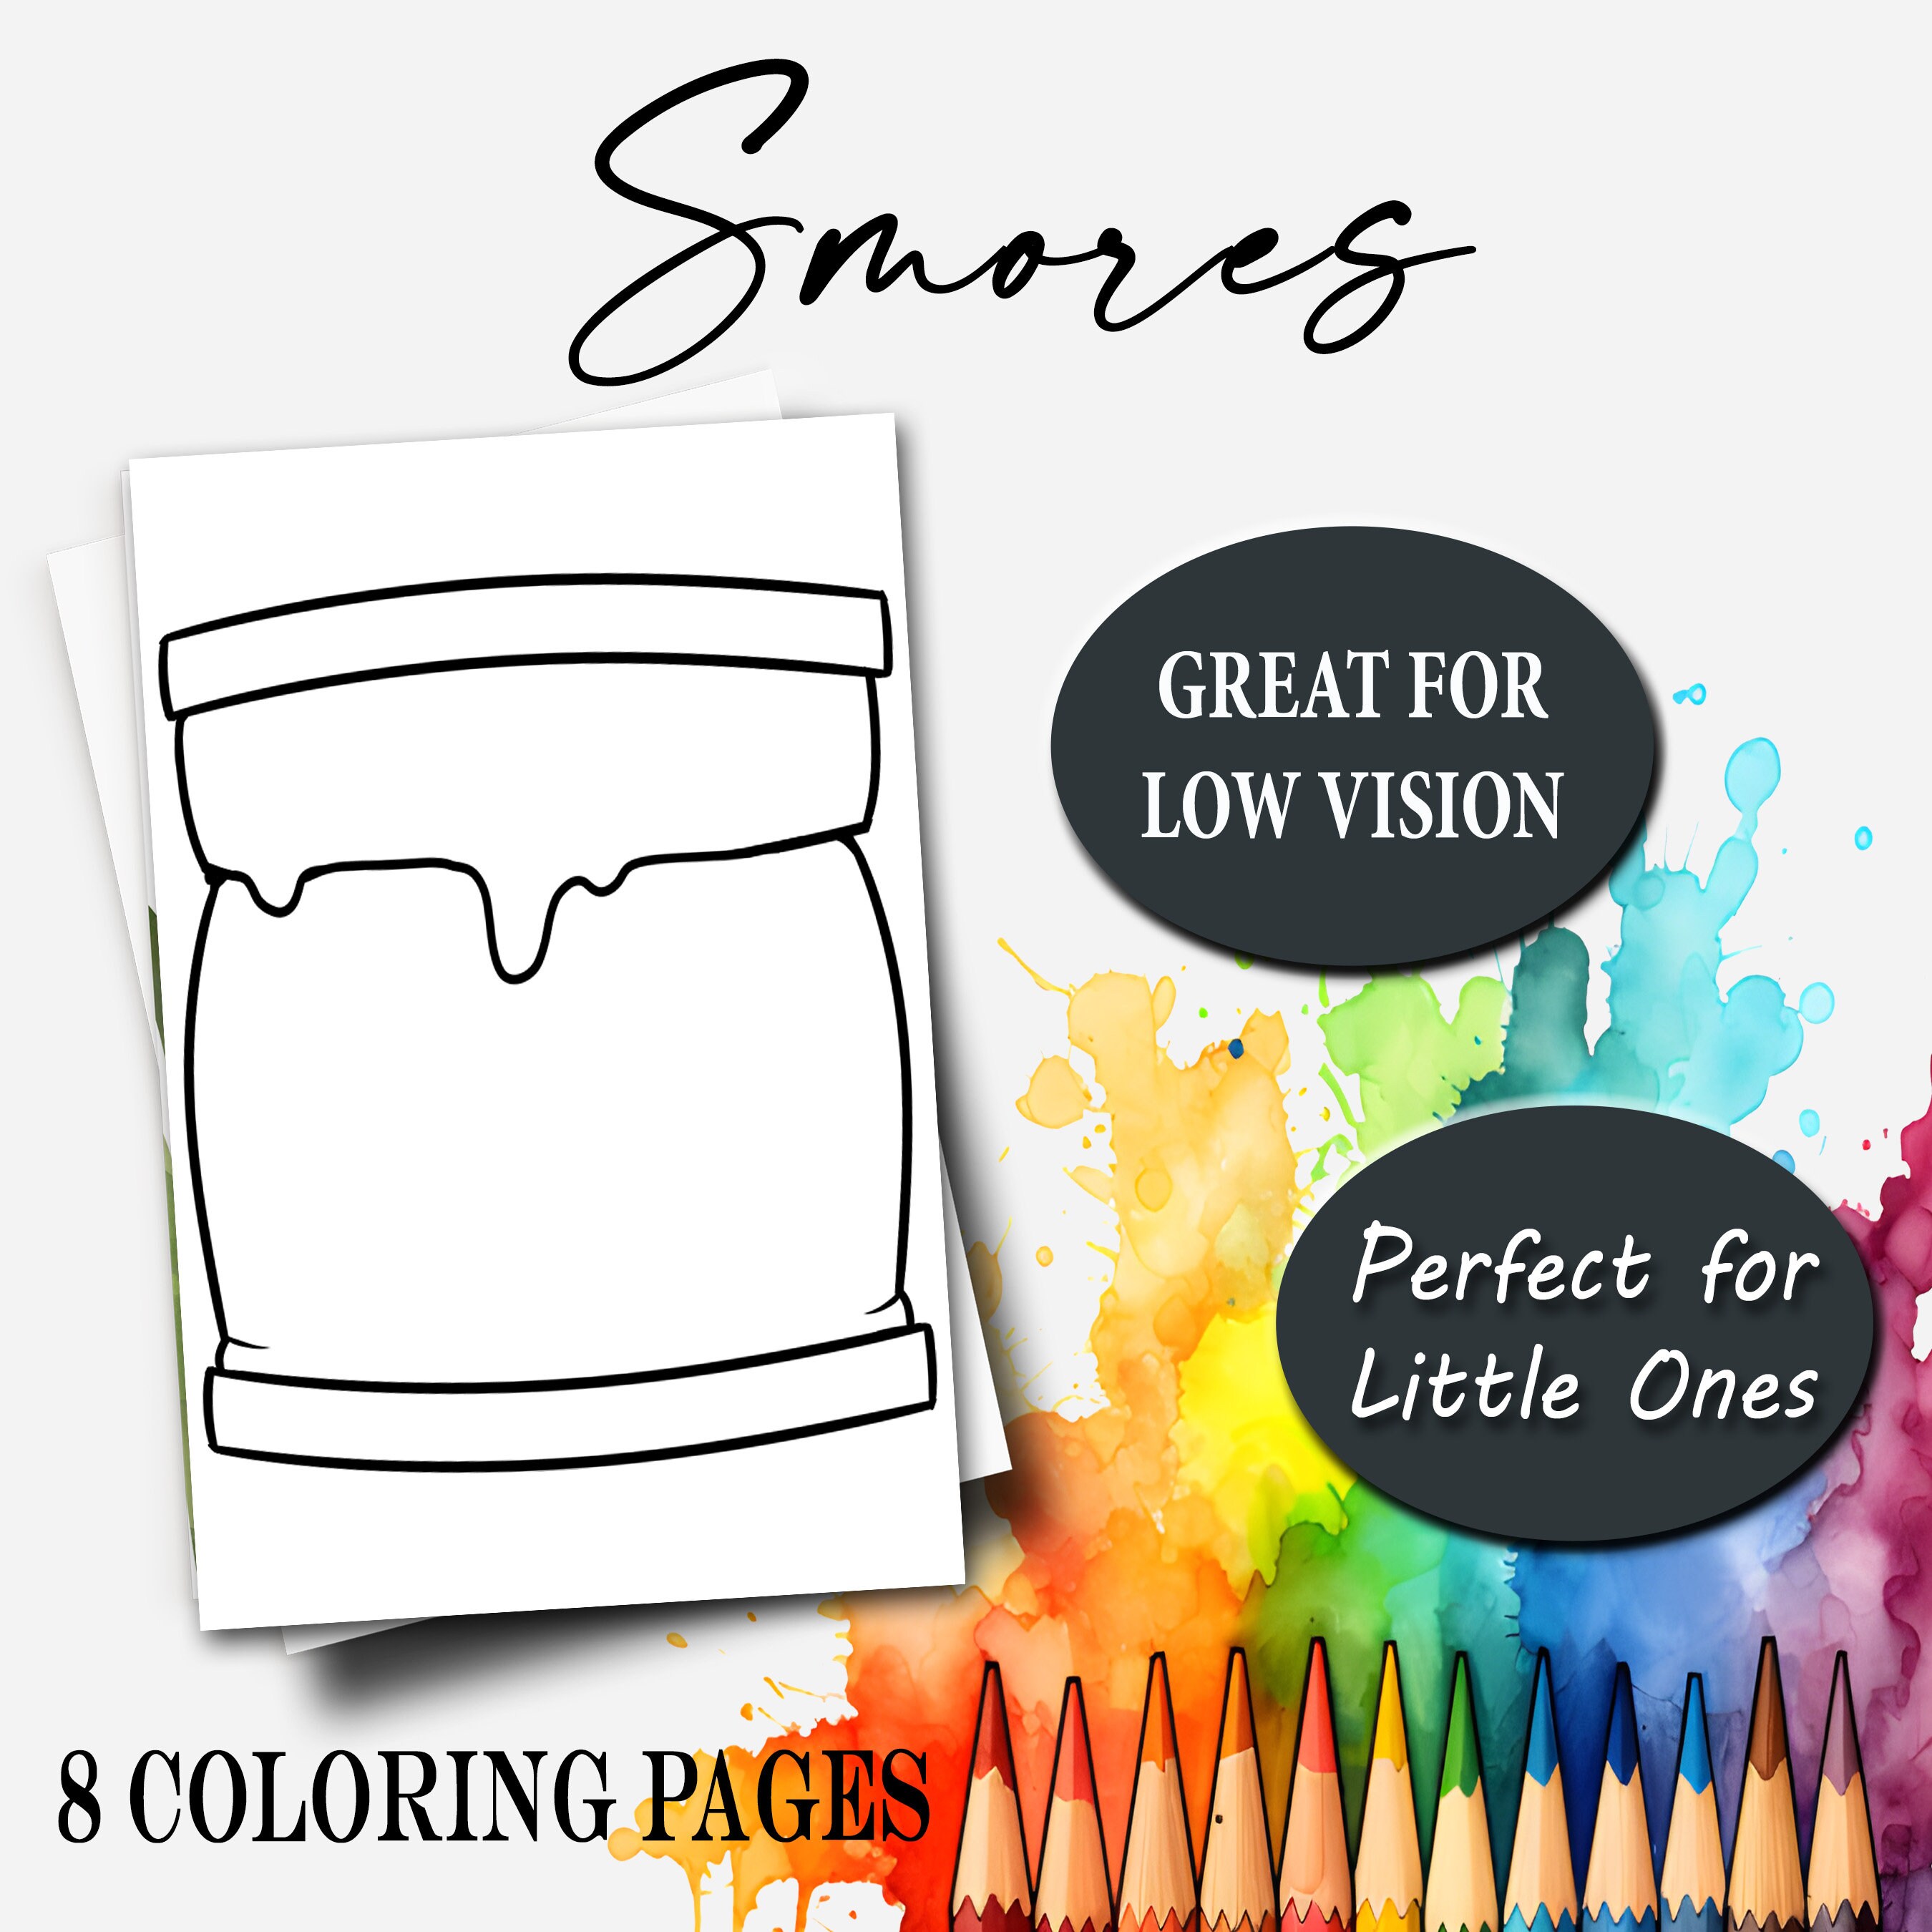 Smores coloring pages coloring pages for kids toddler coloring pages preschool kindergarten classroom activities indoor activities